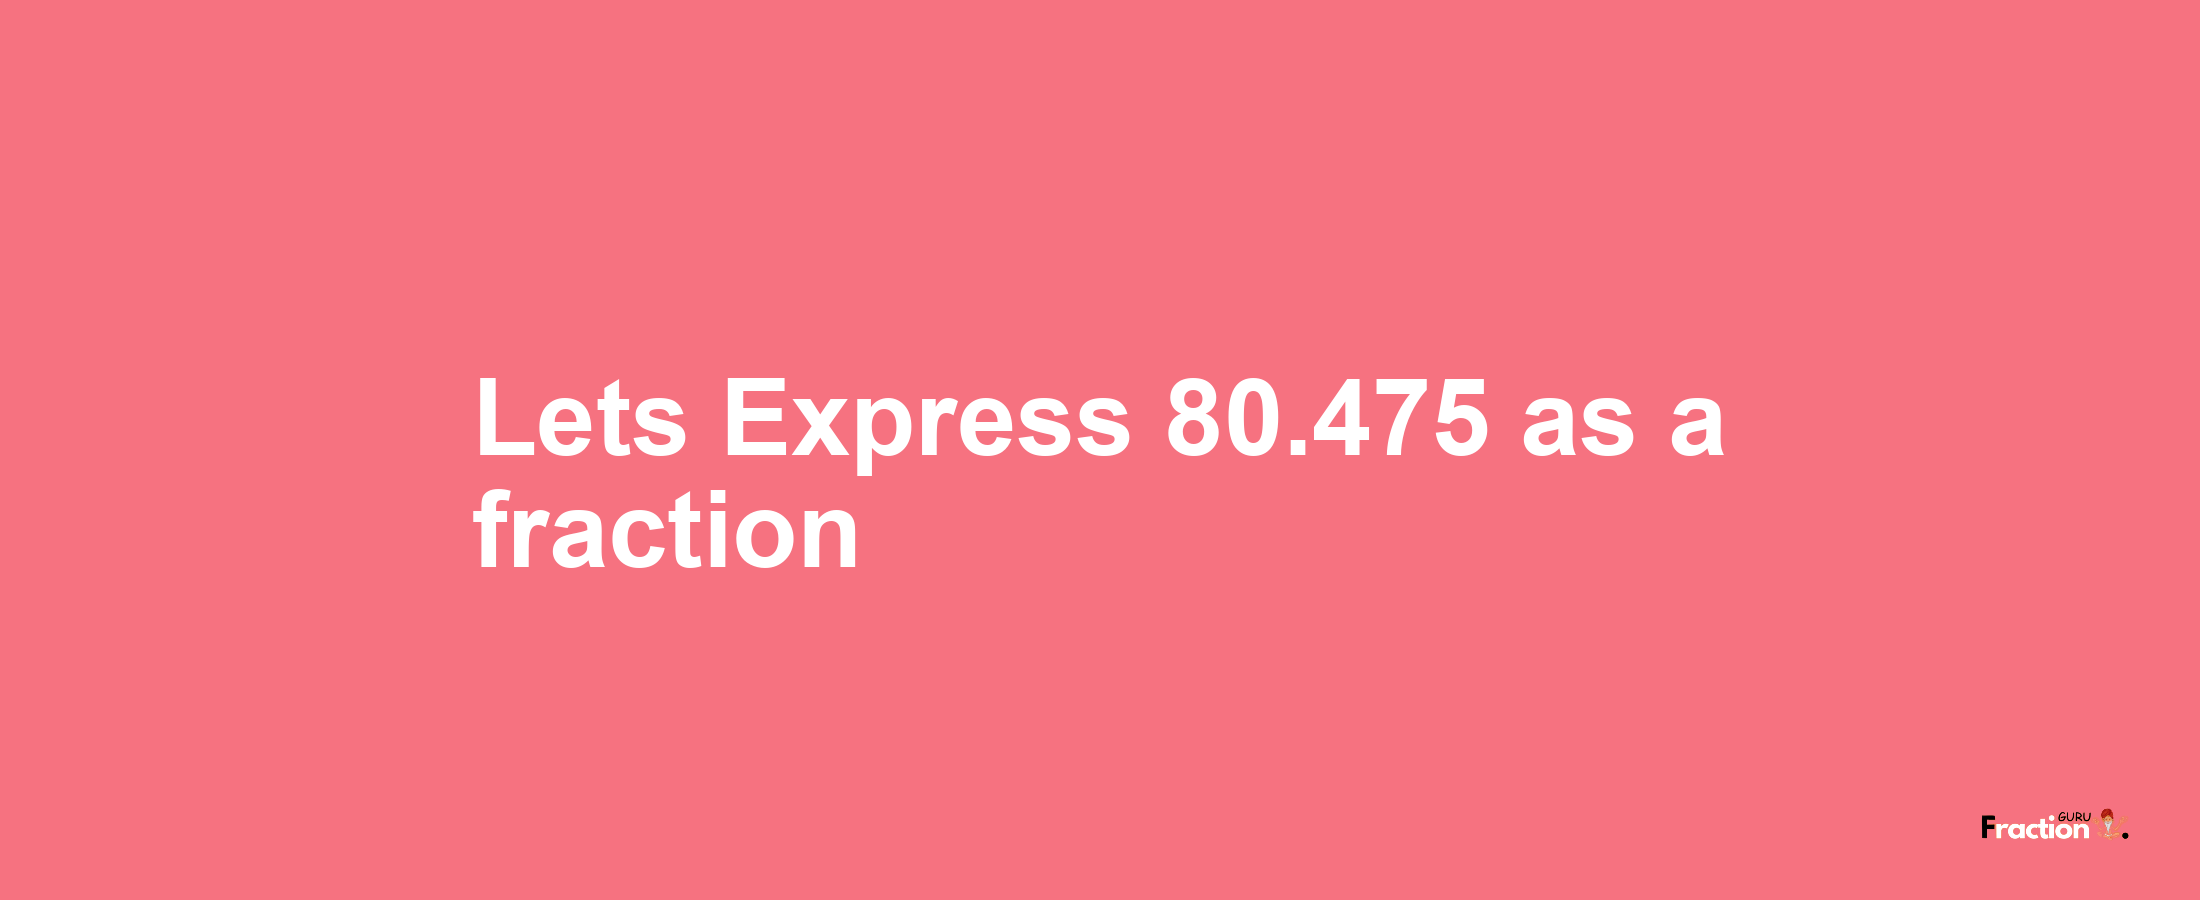 Lets Express 80.475 as afraction